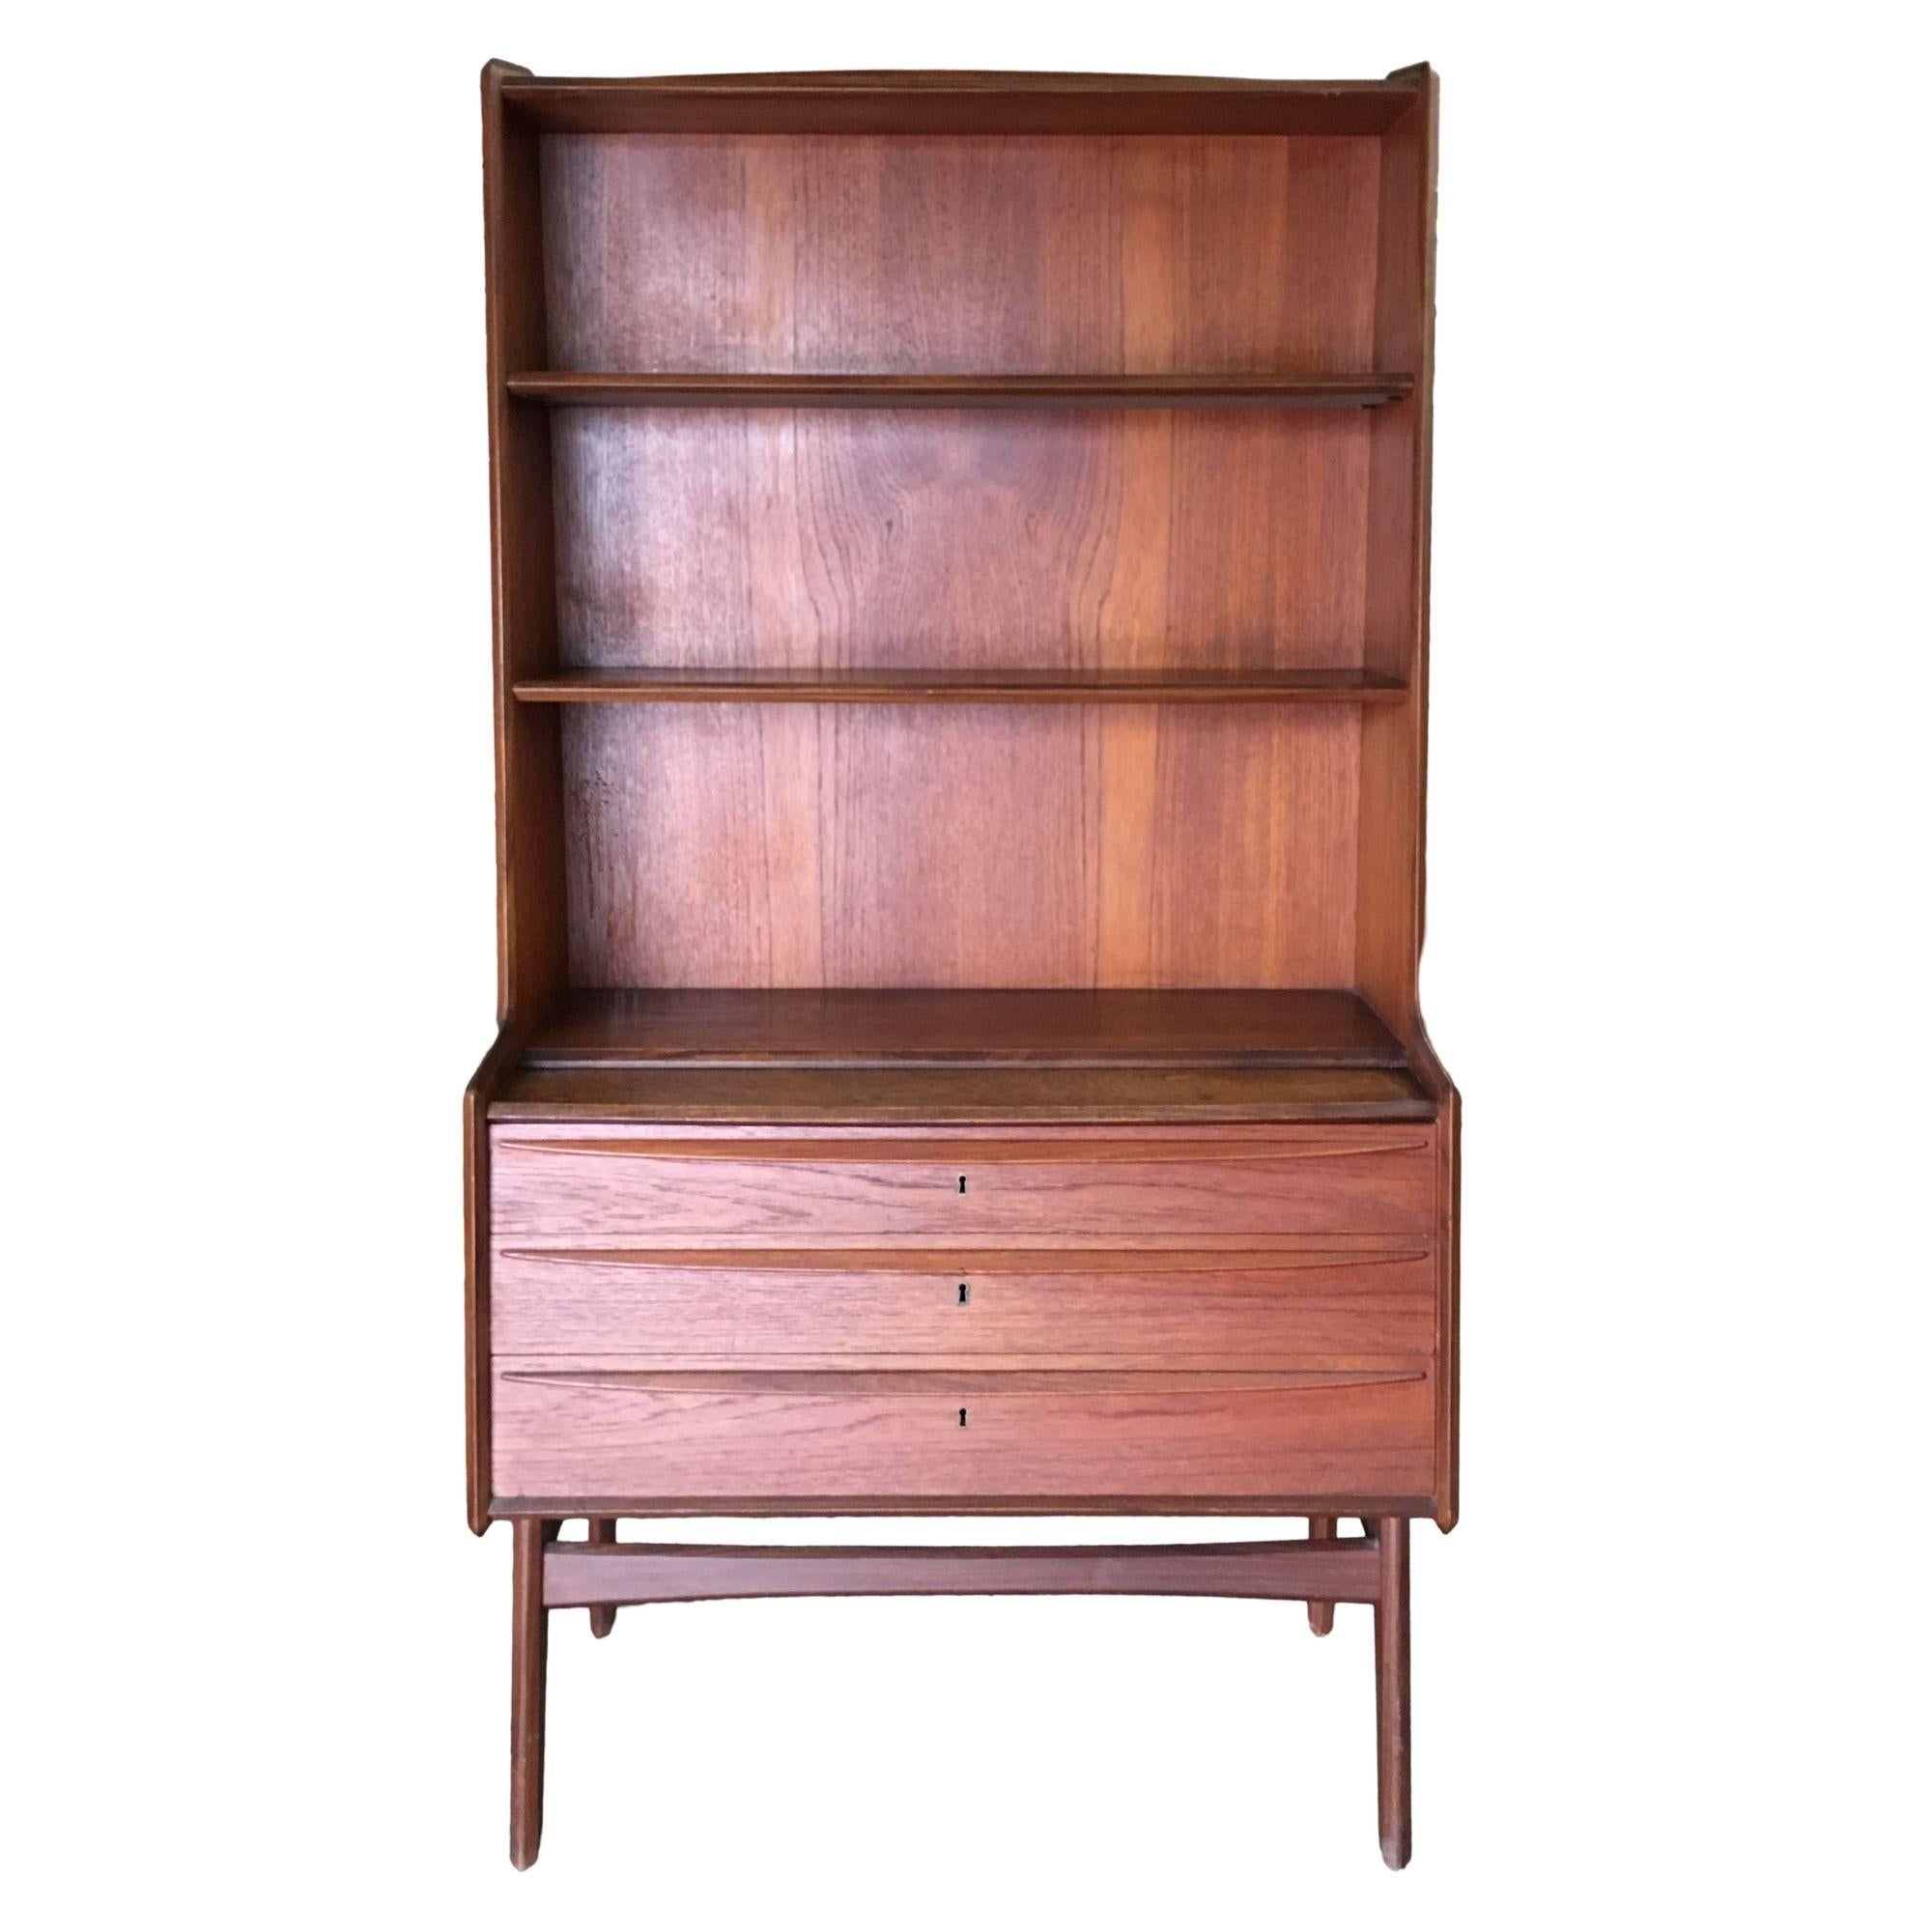 Early 1960s Danish modern teak cupboard display cabinet featuring 3-drawer cabinet with large open fixed 3-shelf display on top all resting a tapered leg base. All 3 drawers featuring bronze skeleton key locks with beautifully sculpted edges along